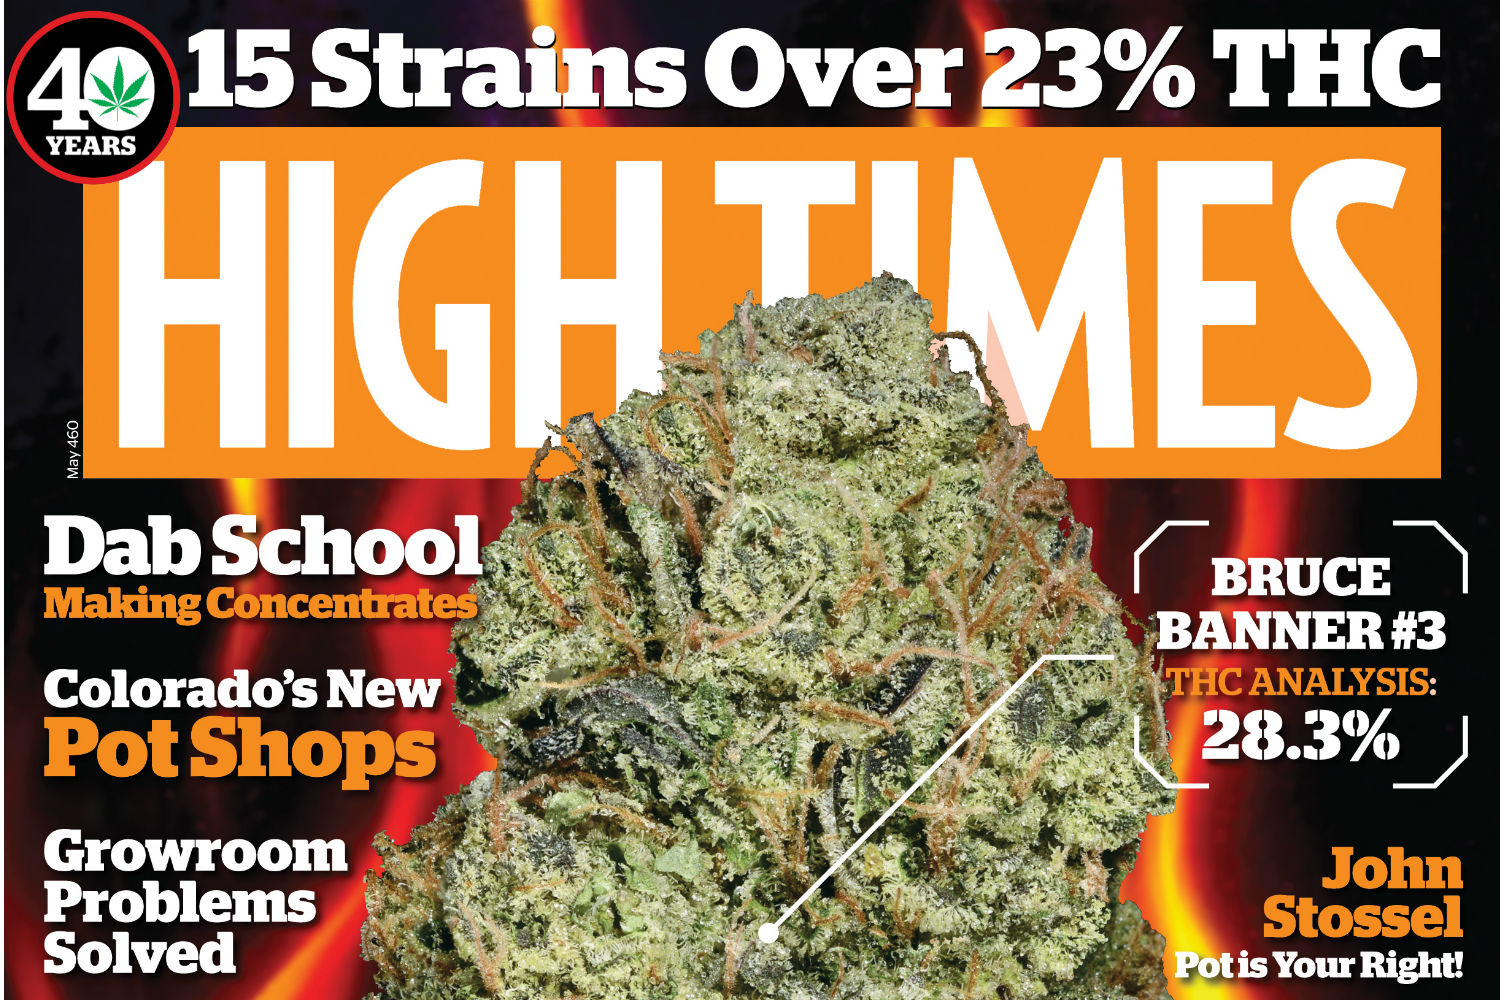 The May cover of High Times magazine features a photograph by Cannabist photographer Ry Prichard. (Via High Times)